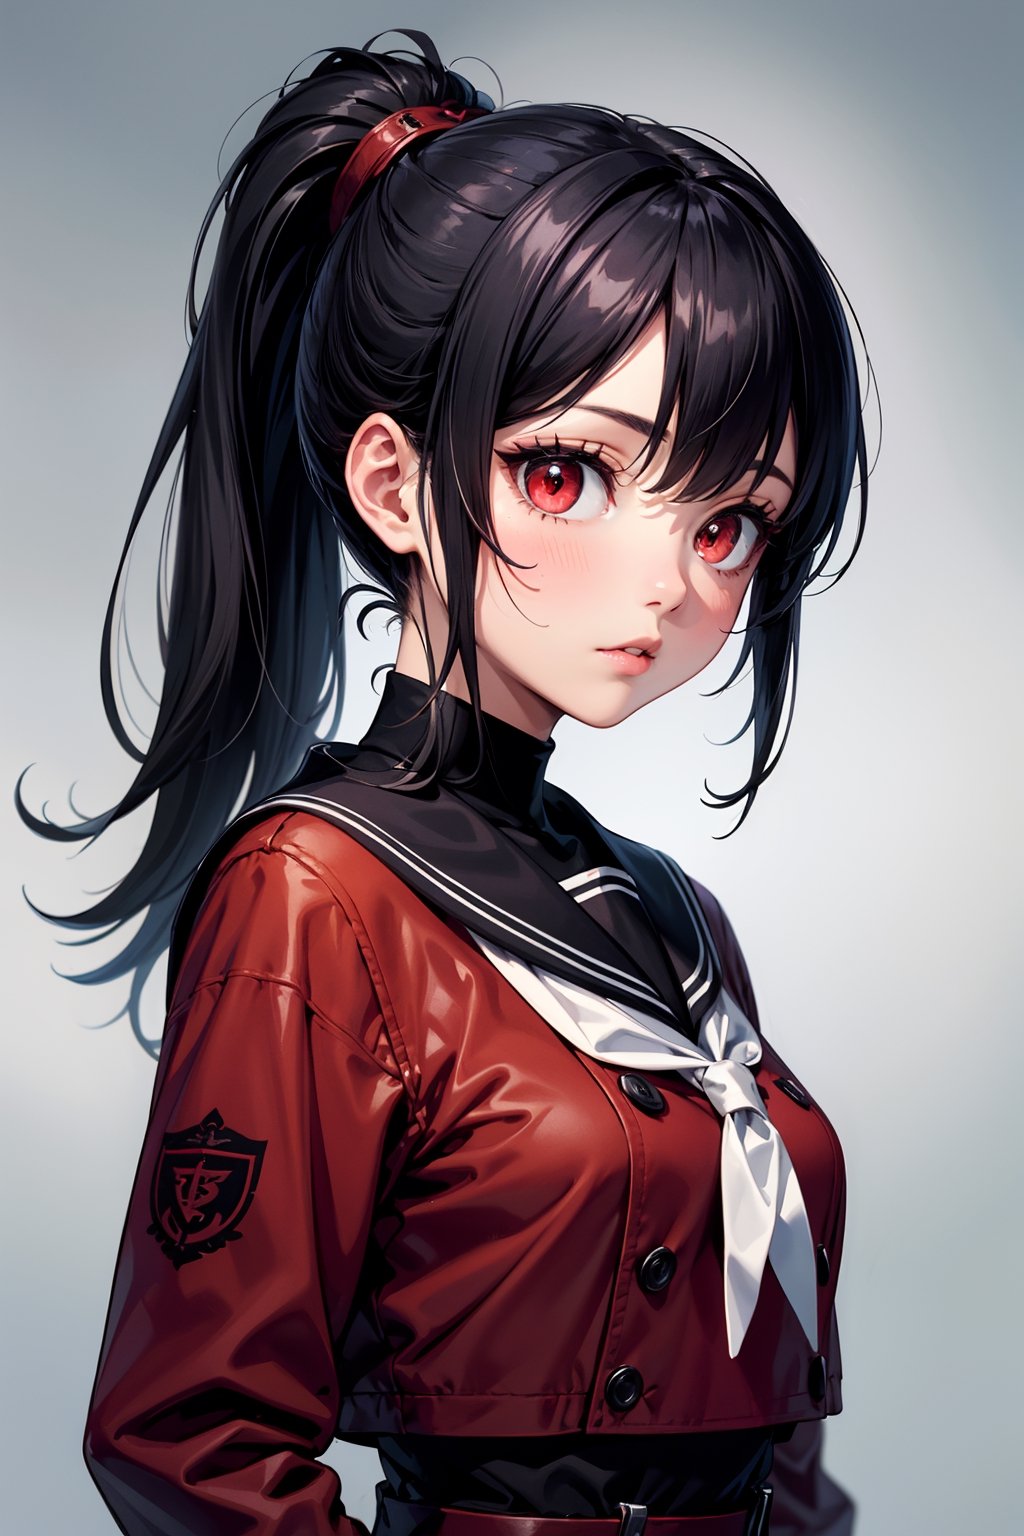 1woman,army woman, ponytail, black hair, cute face, red eyes, army long coat, sailor school uniform, black theme, stylish pose, standing, harbar, fantasy, ultra detailed, ultra highres, masterpiece, 